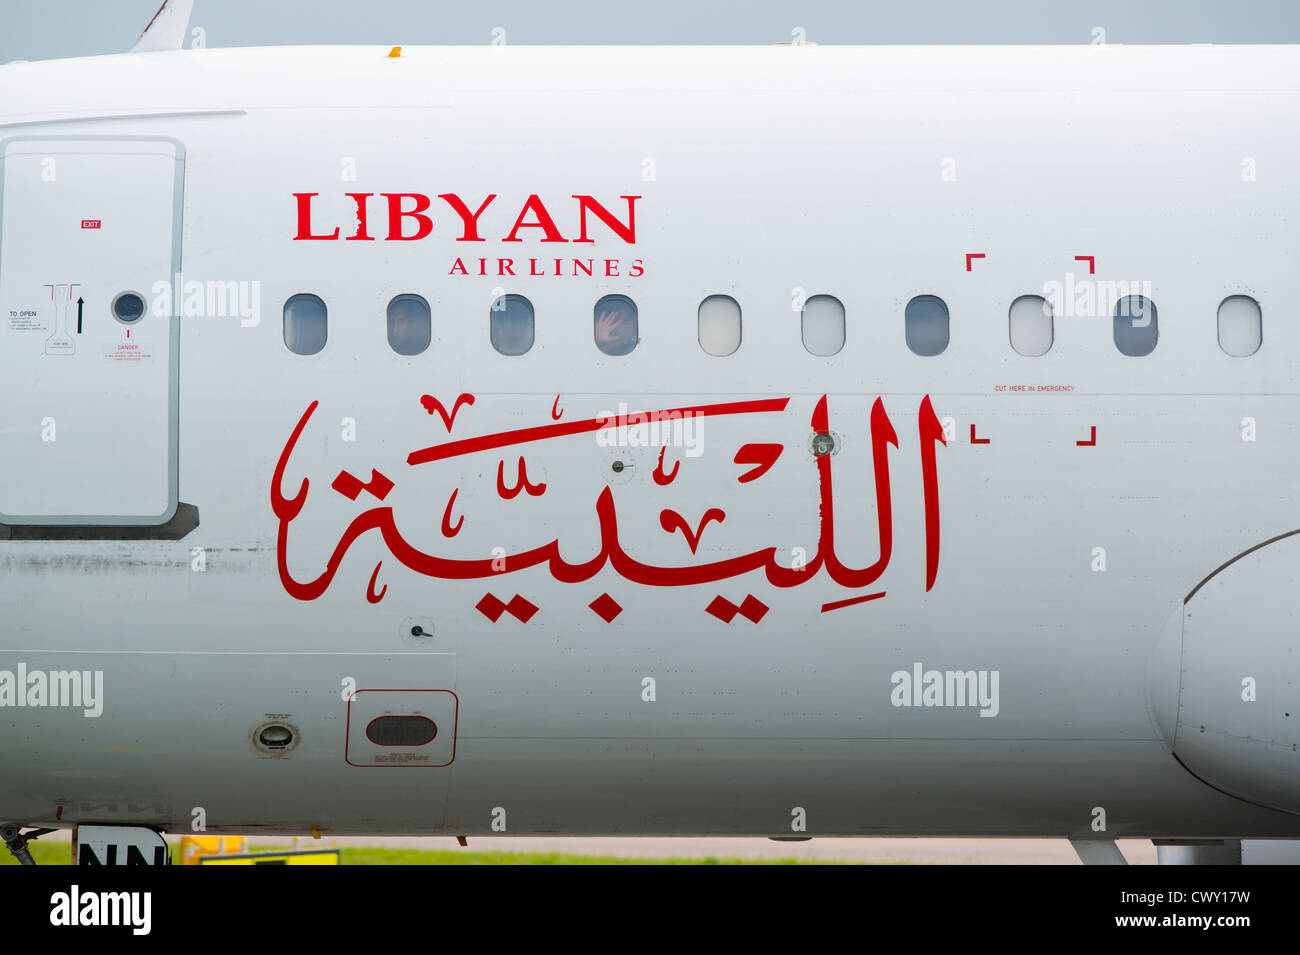 A close up of the Libyan Airlines logo on the fuselage of a passenger aircraft (Editorial use only) Stock Photo